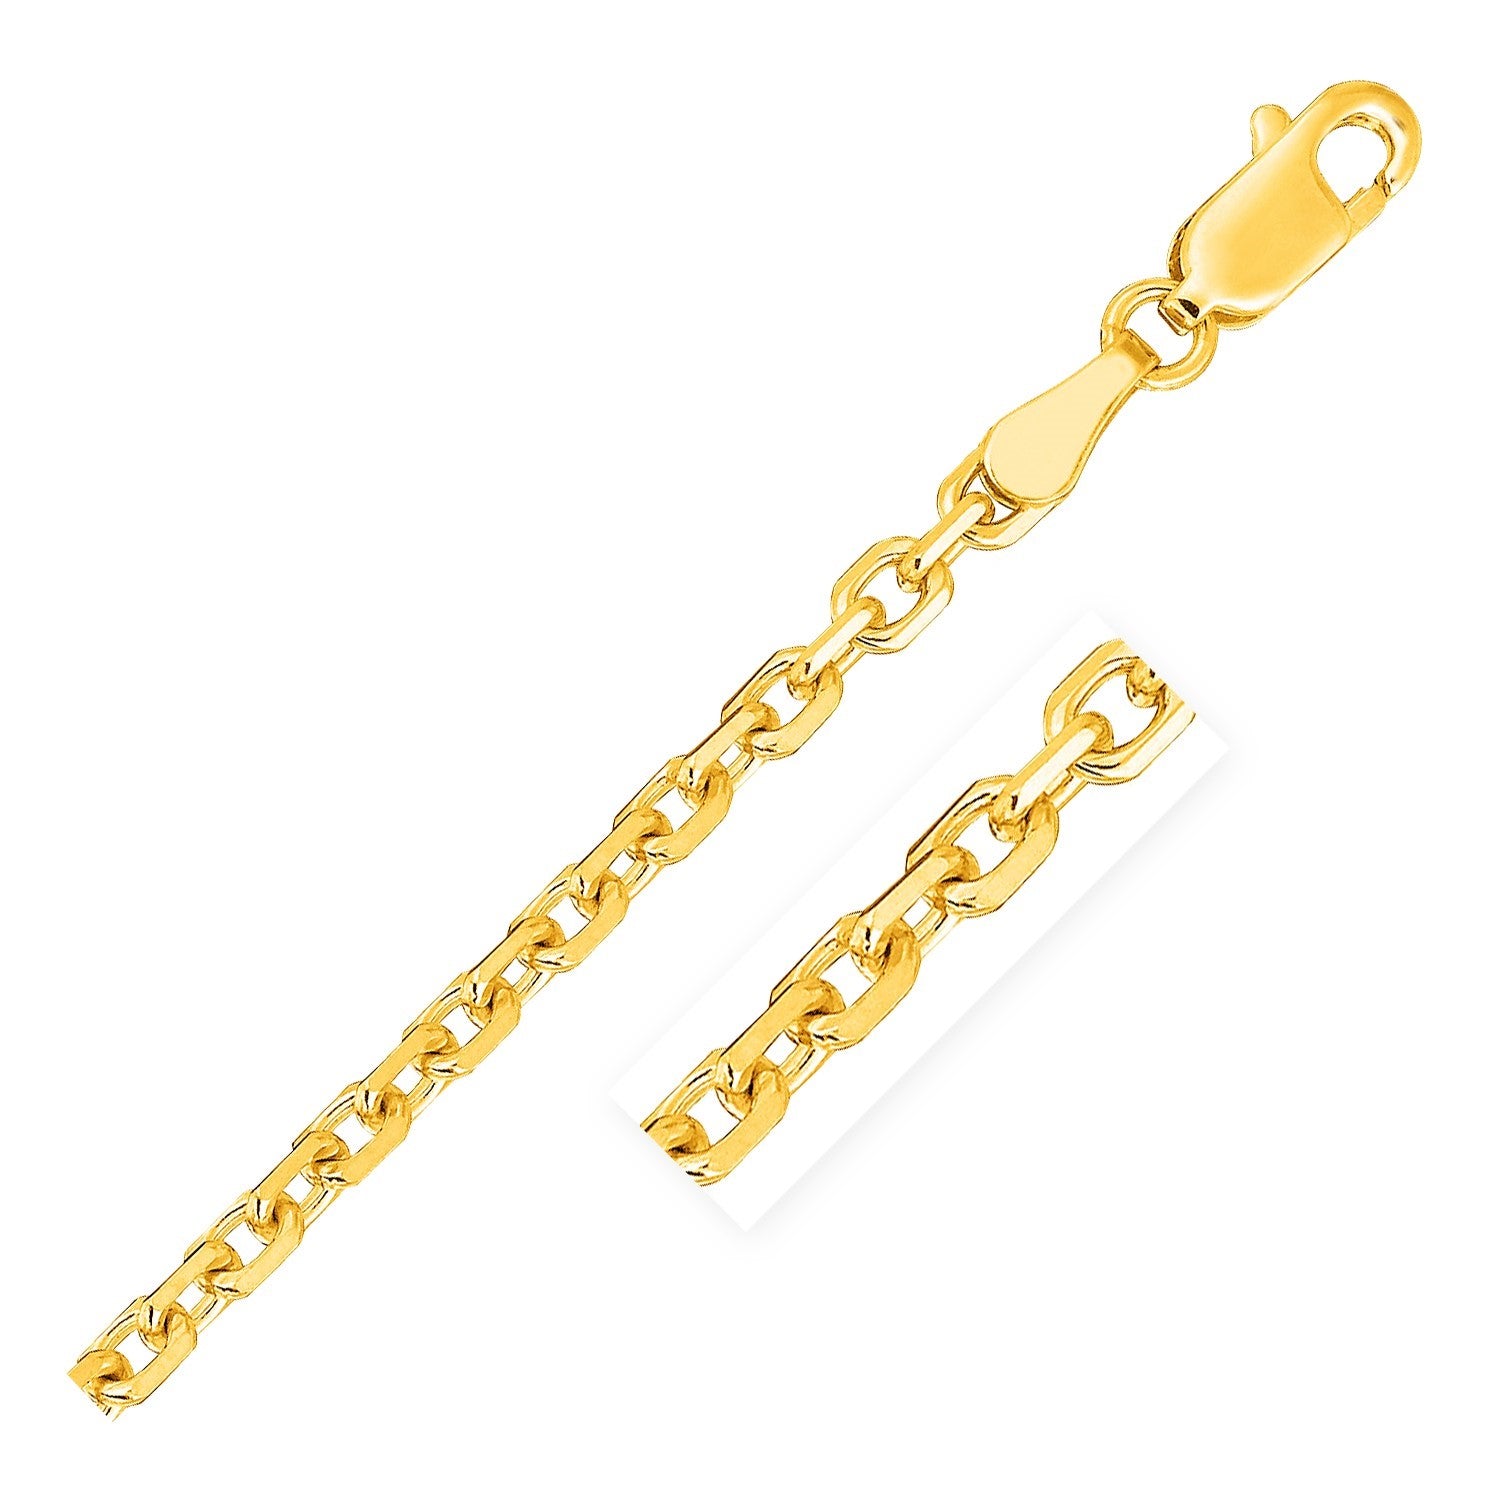 2 6Mm 18K Yellow Gold Diamond Cut Cable Link Chain 77467-1